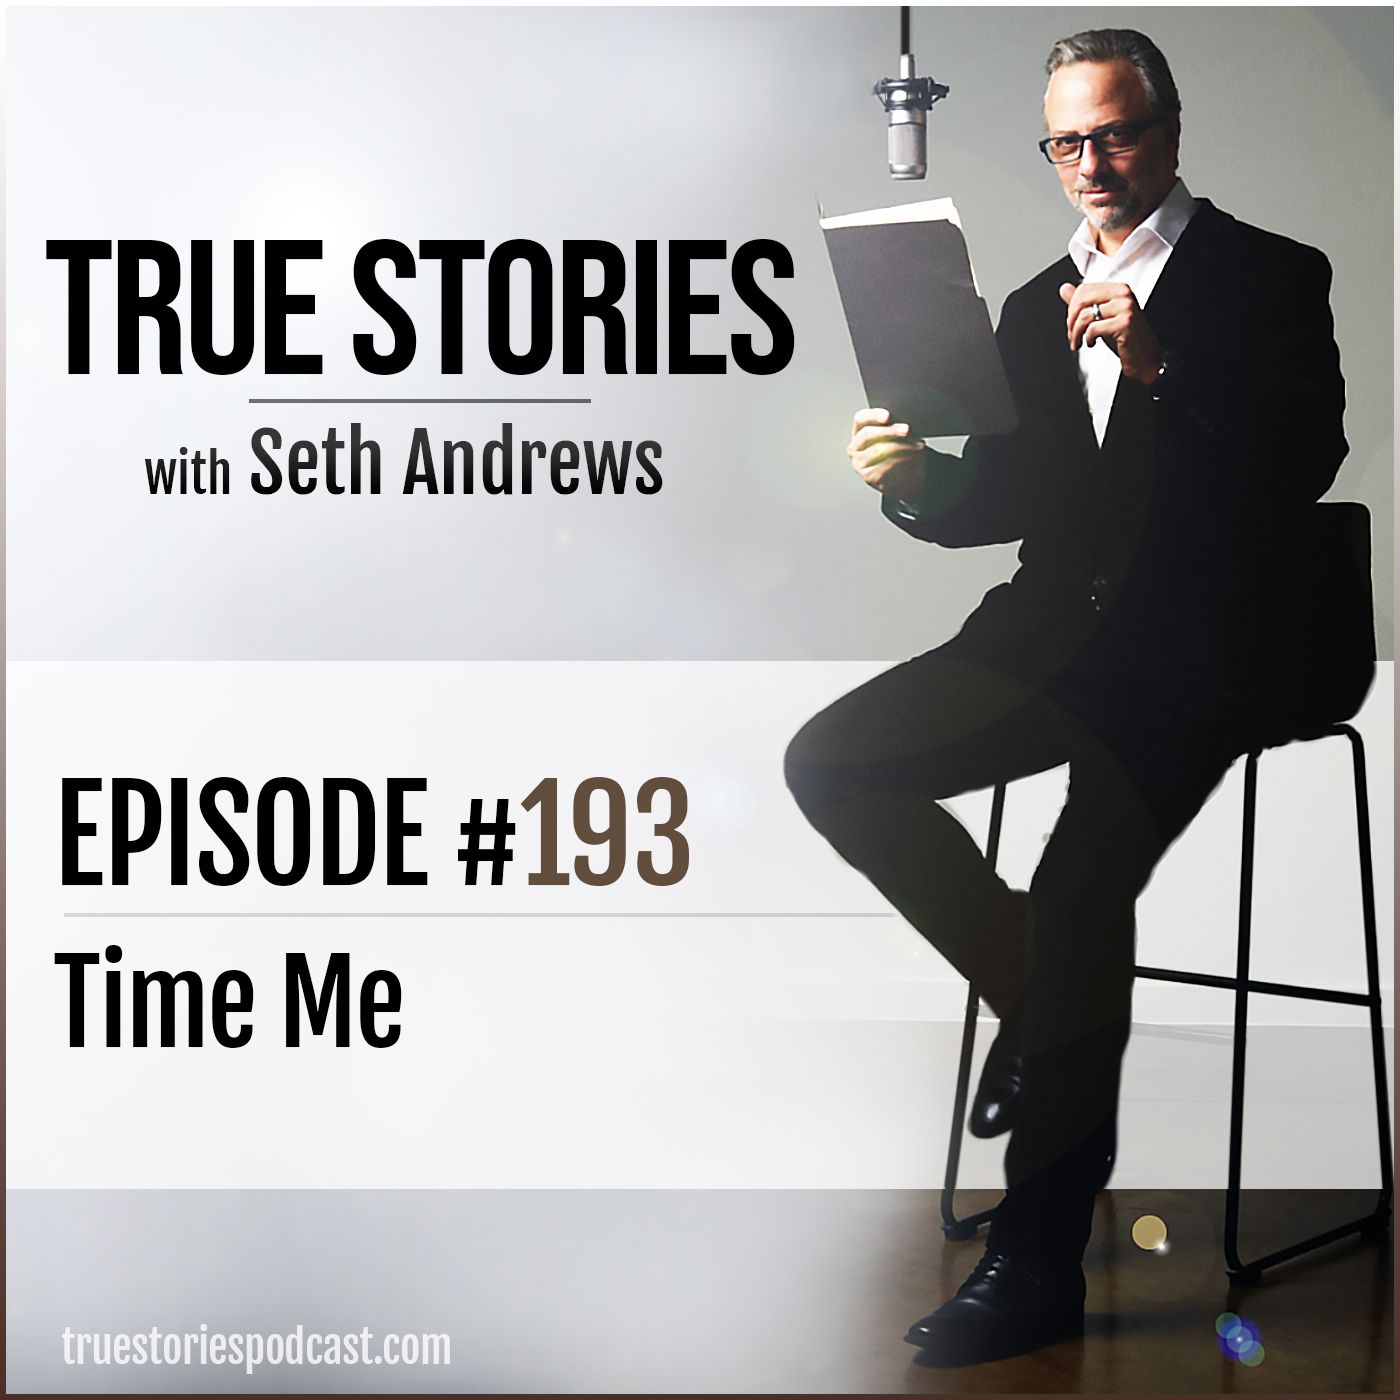 True Stories #193 - Time Me